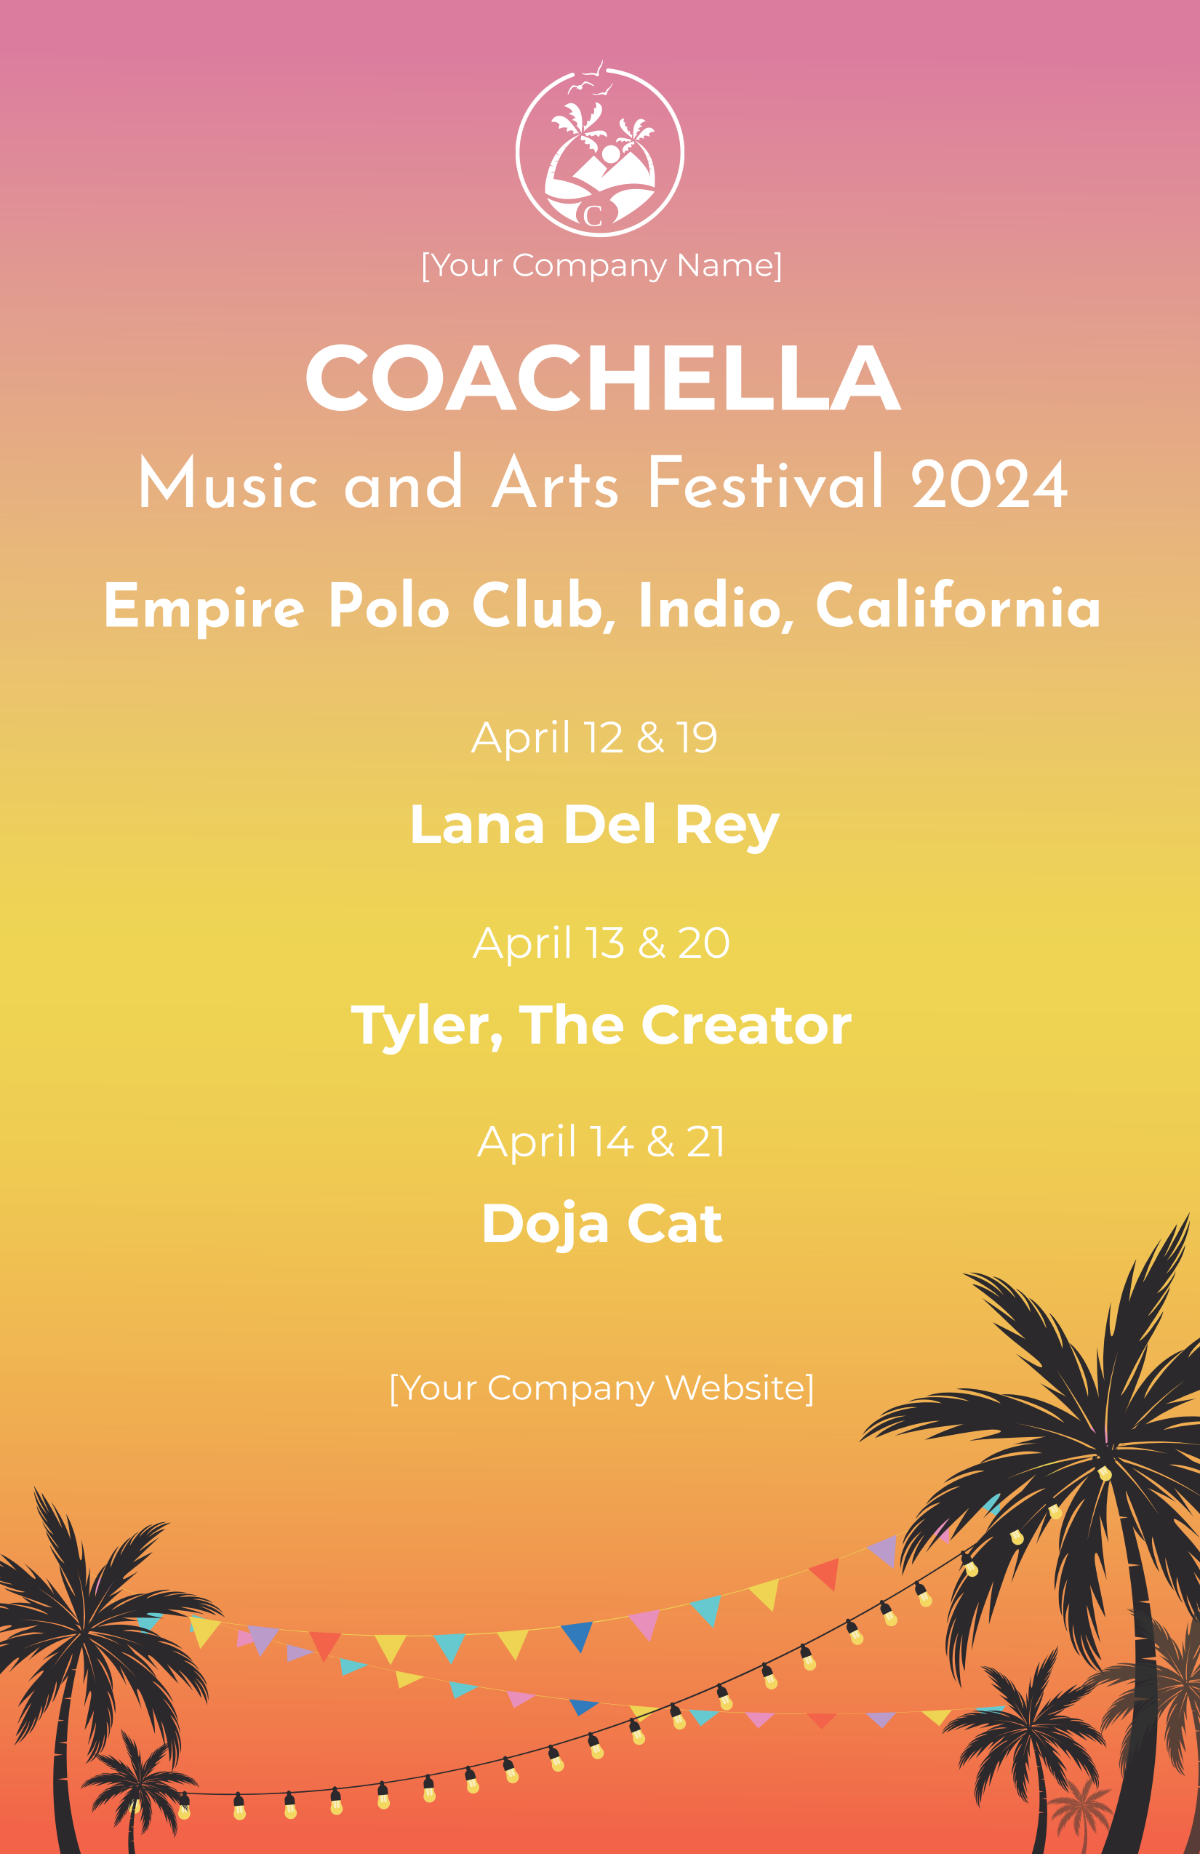 Coachella Poster by Year